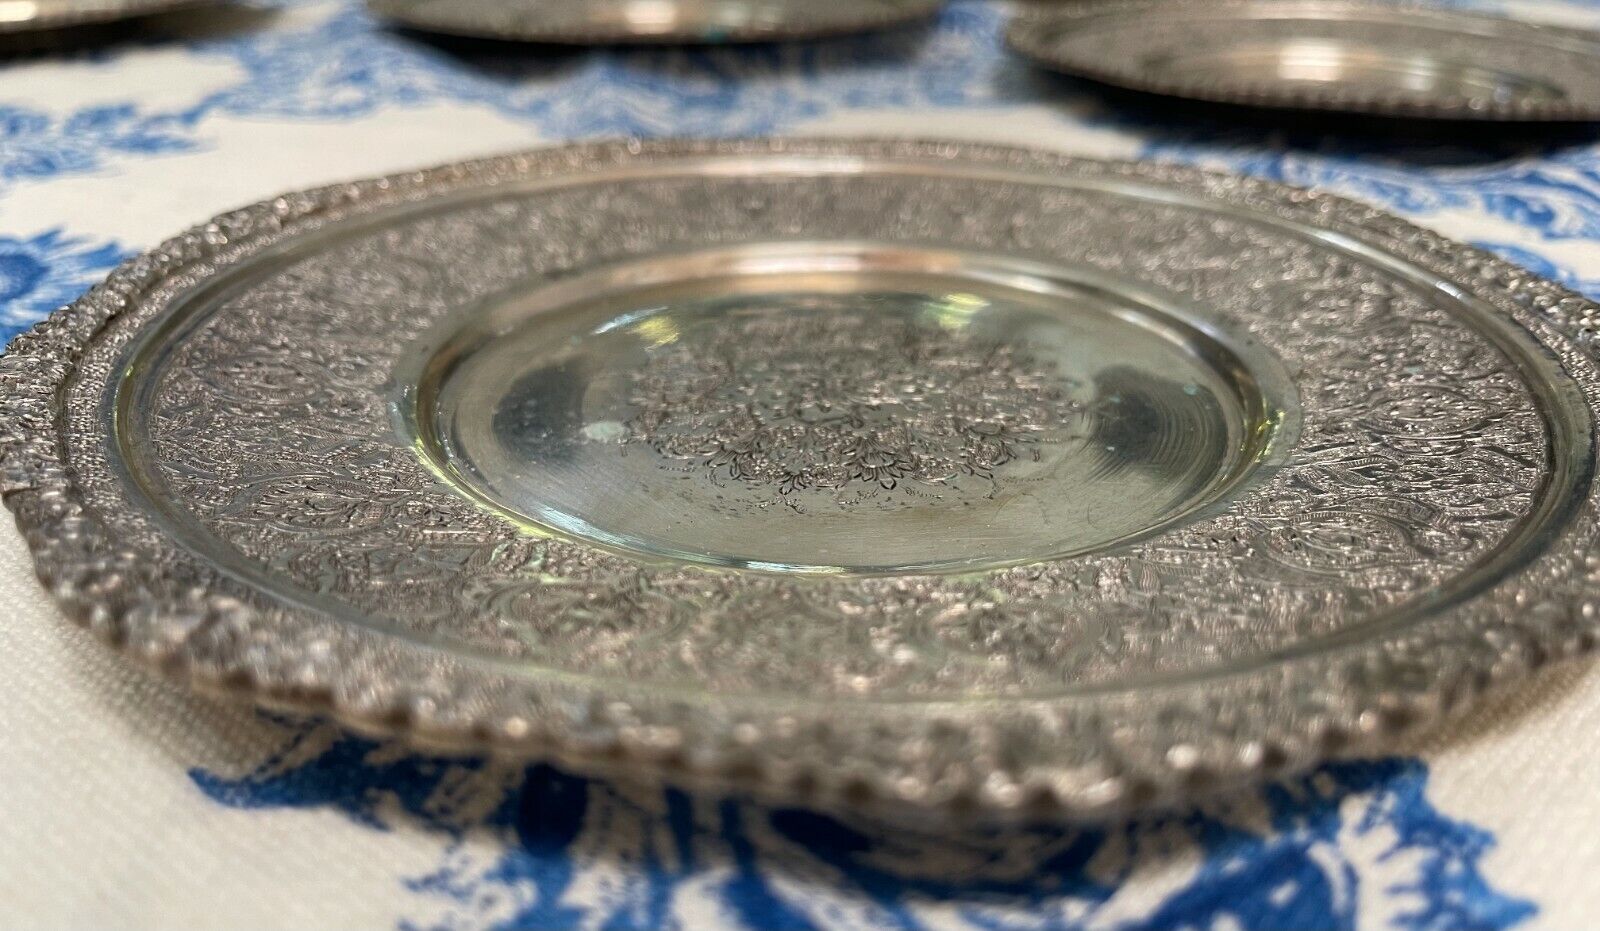 6 Plate Set AUTHENTIC Antique 84 Silver Persian Islamic middle eastern Art  Без бренда - фотография #4